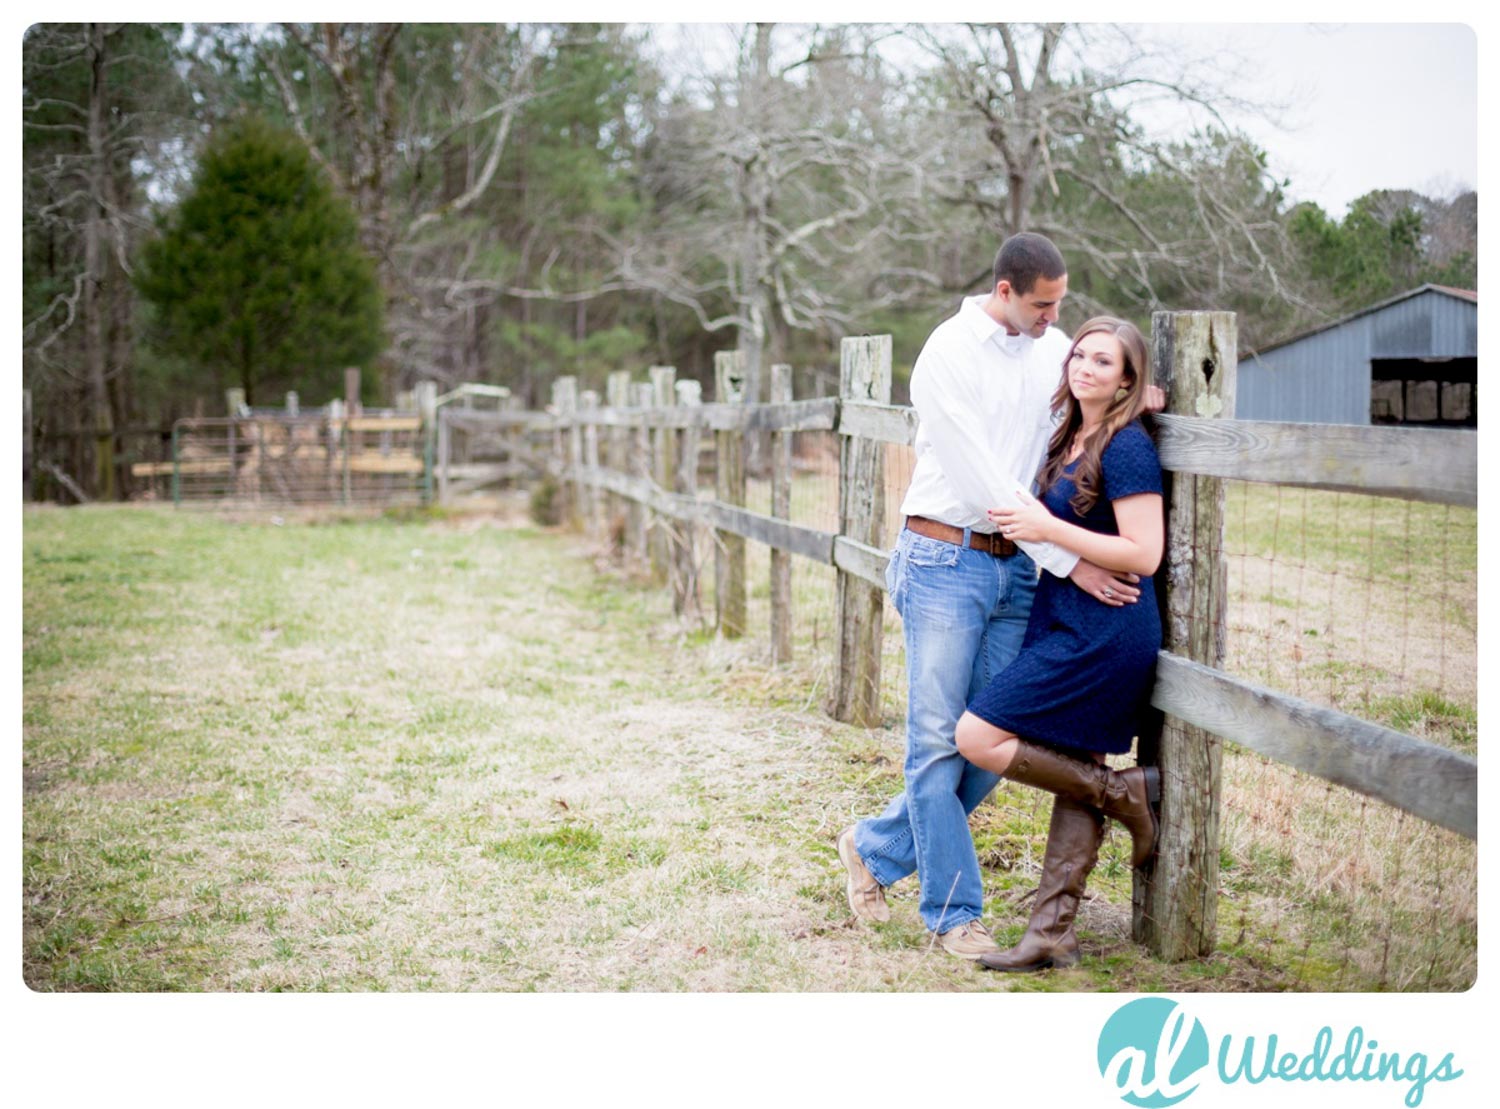 Alabama Wedding Photography,Country,Natural Light,Waterfall,Winter,engagement,ice,outdoors,snow,